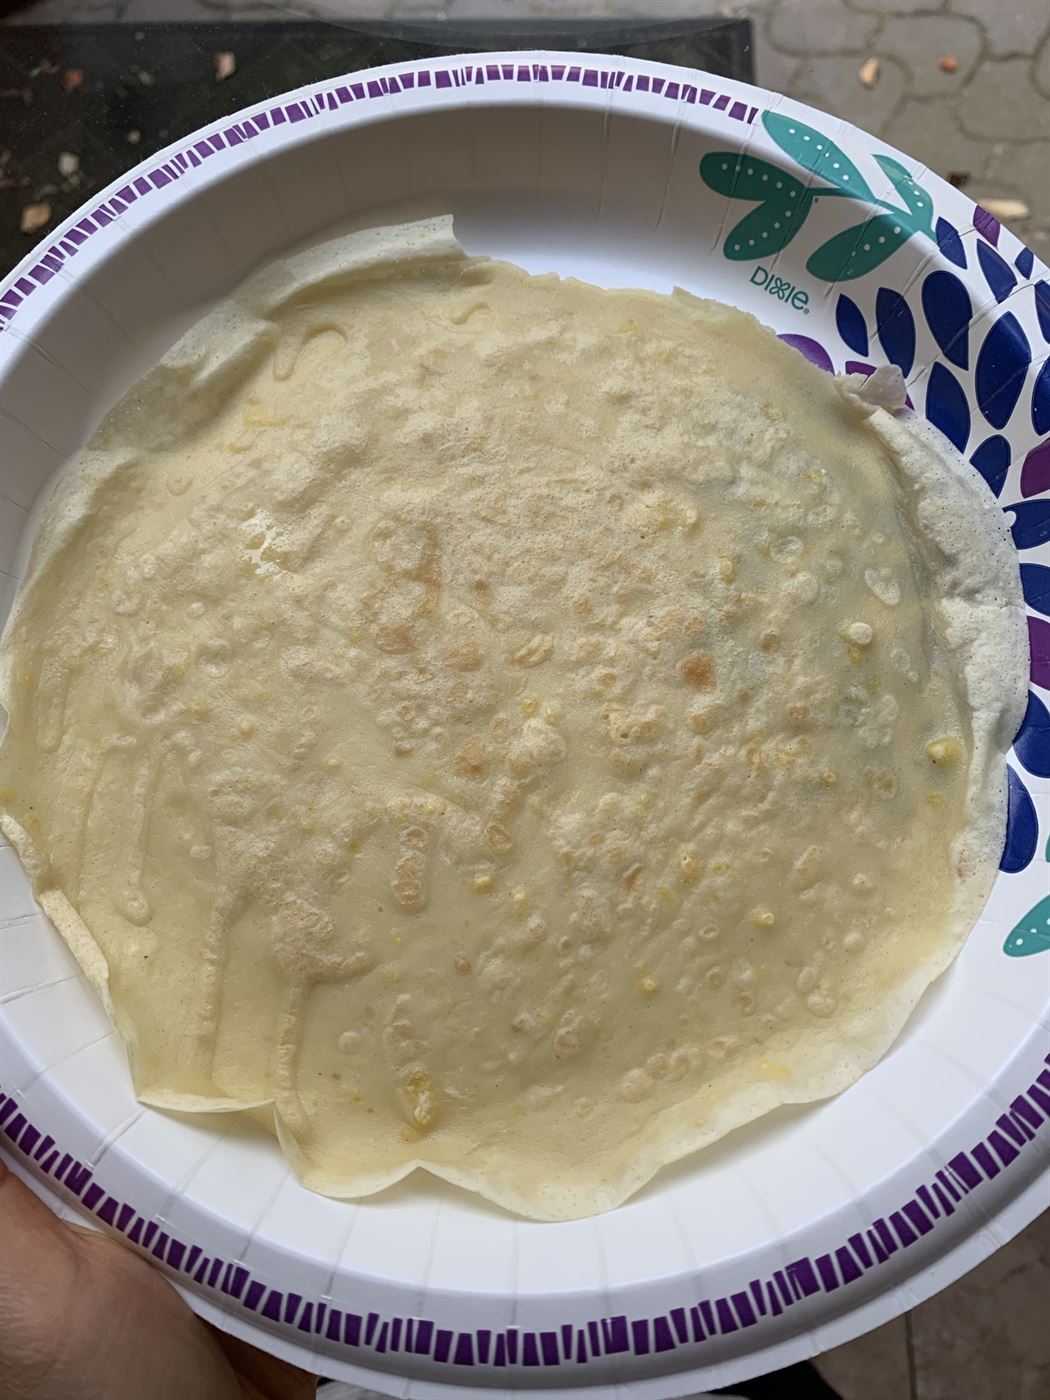 You'll know your crepes are done when the sides start to curl and you see golden brown spots all over the middle.